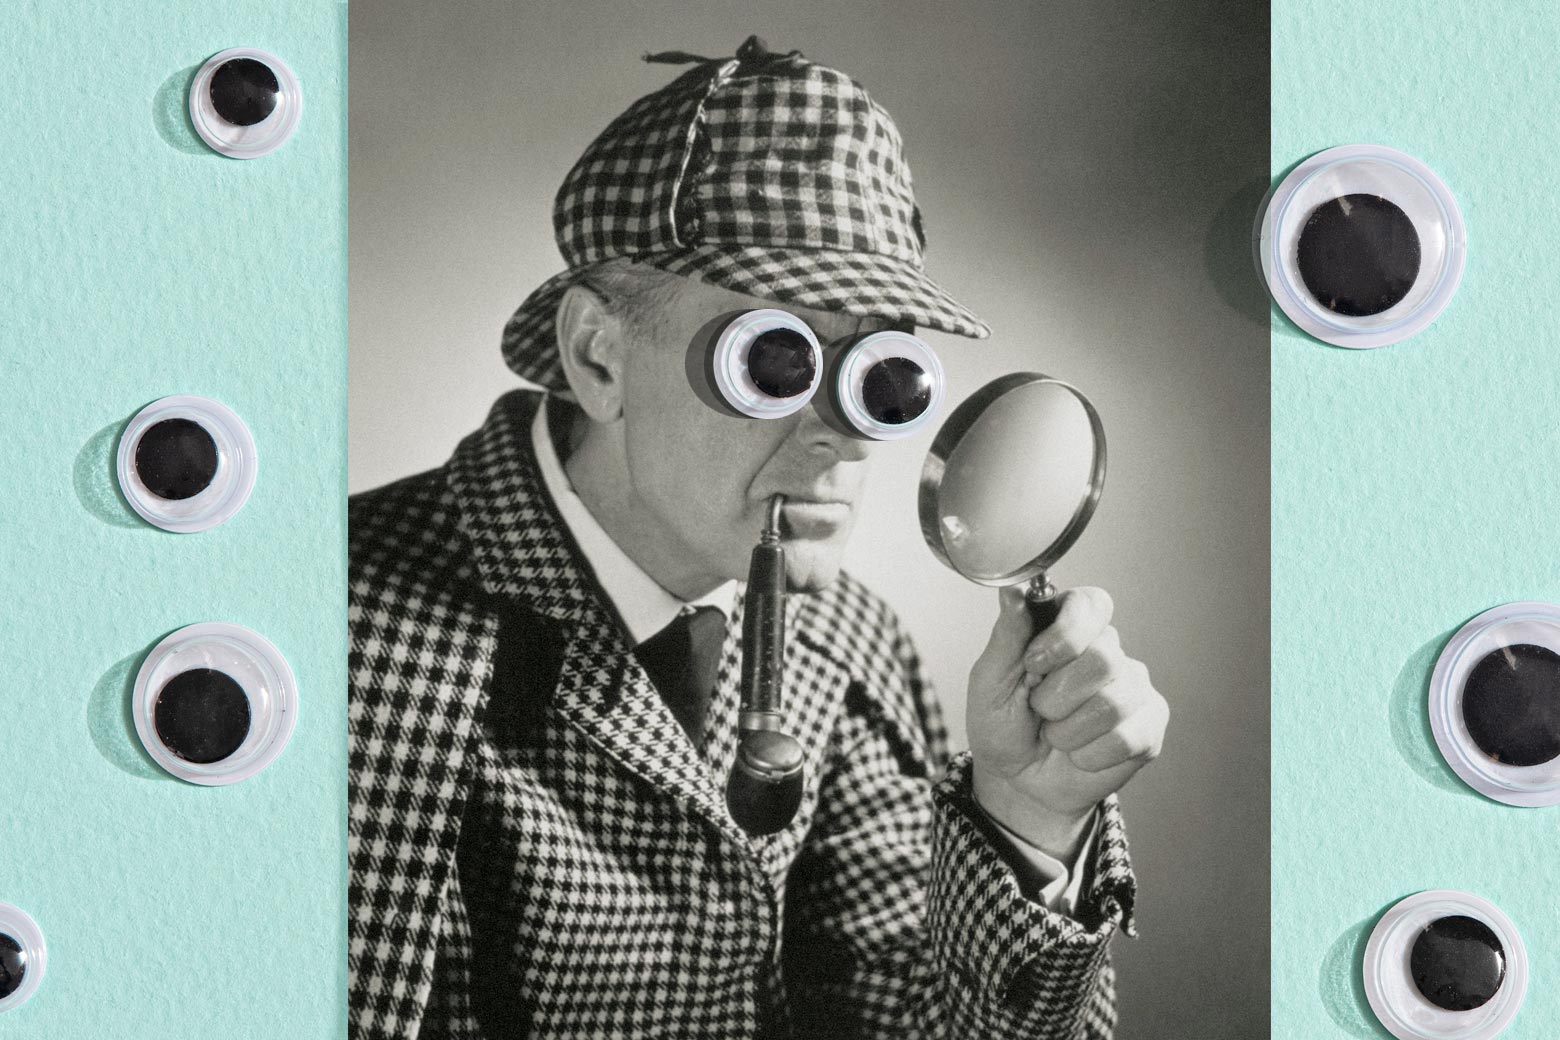 Is Everything Everywhere All at Once causing a googly eye shortage